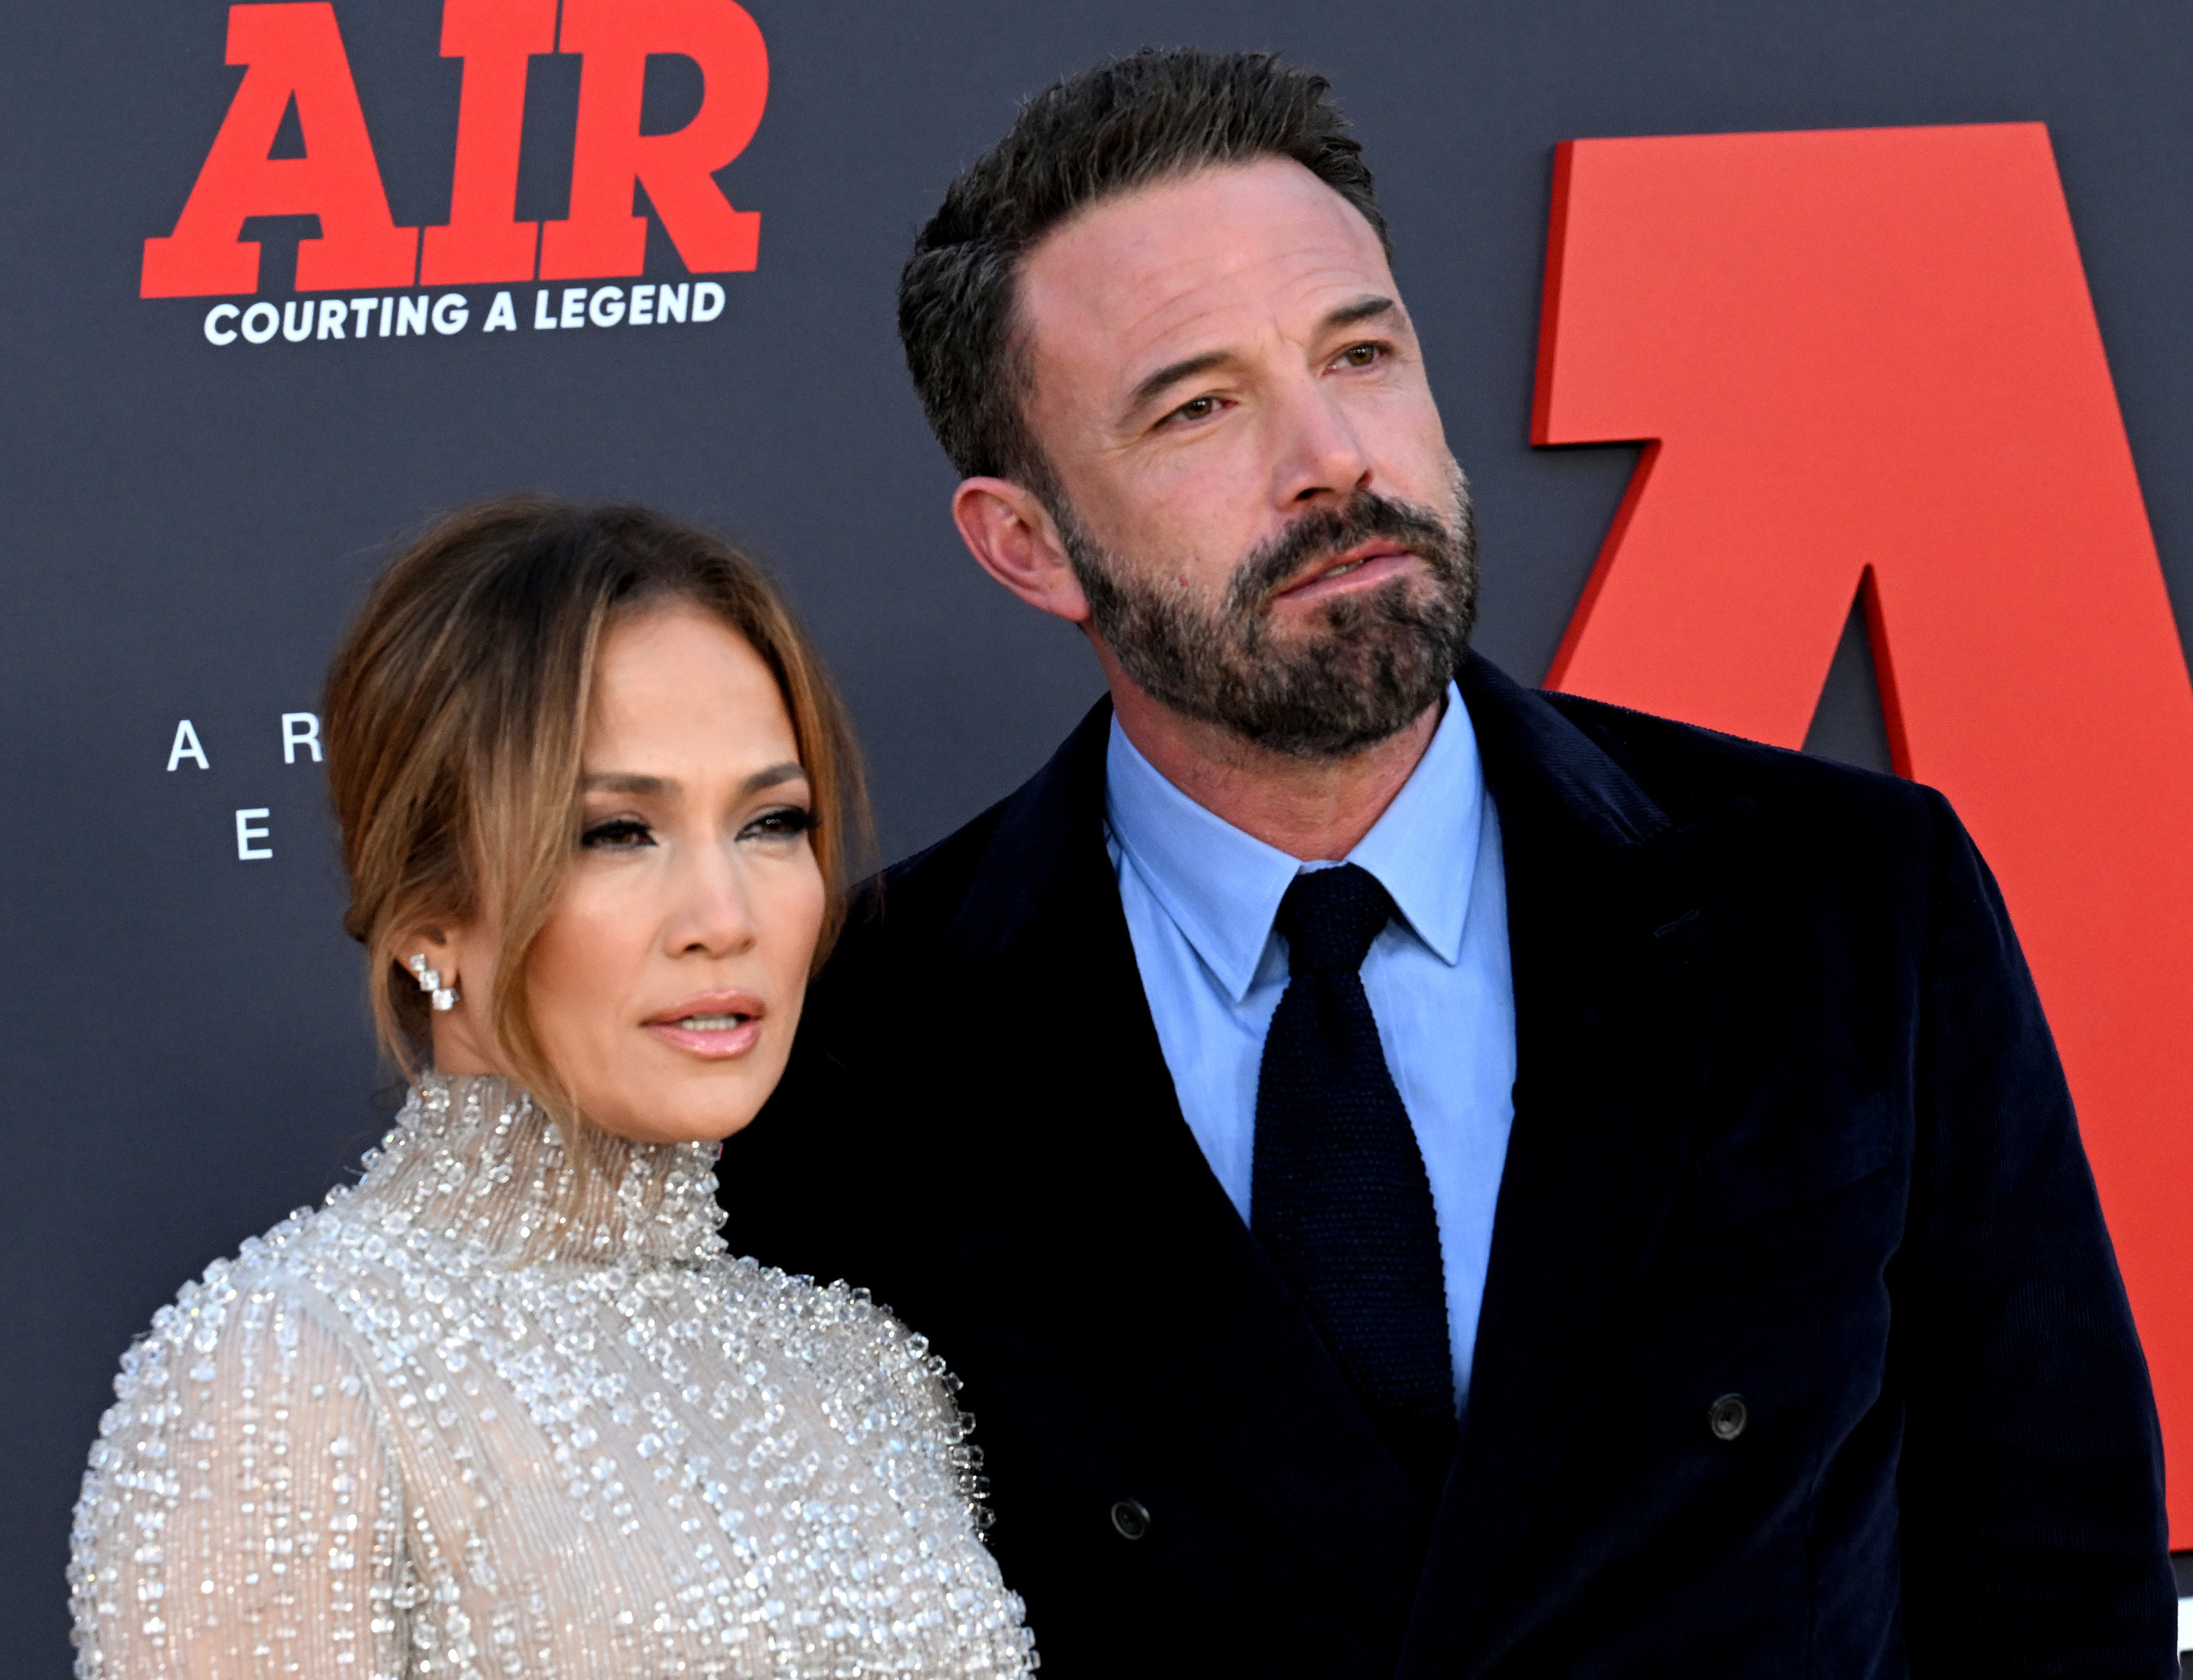 Jennifer Lopez in a beaded gown posing with Ben Affleck in suit on the red carpet for the Air movie premiere